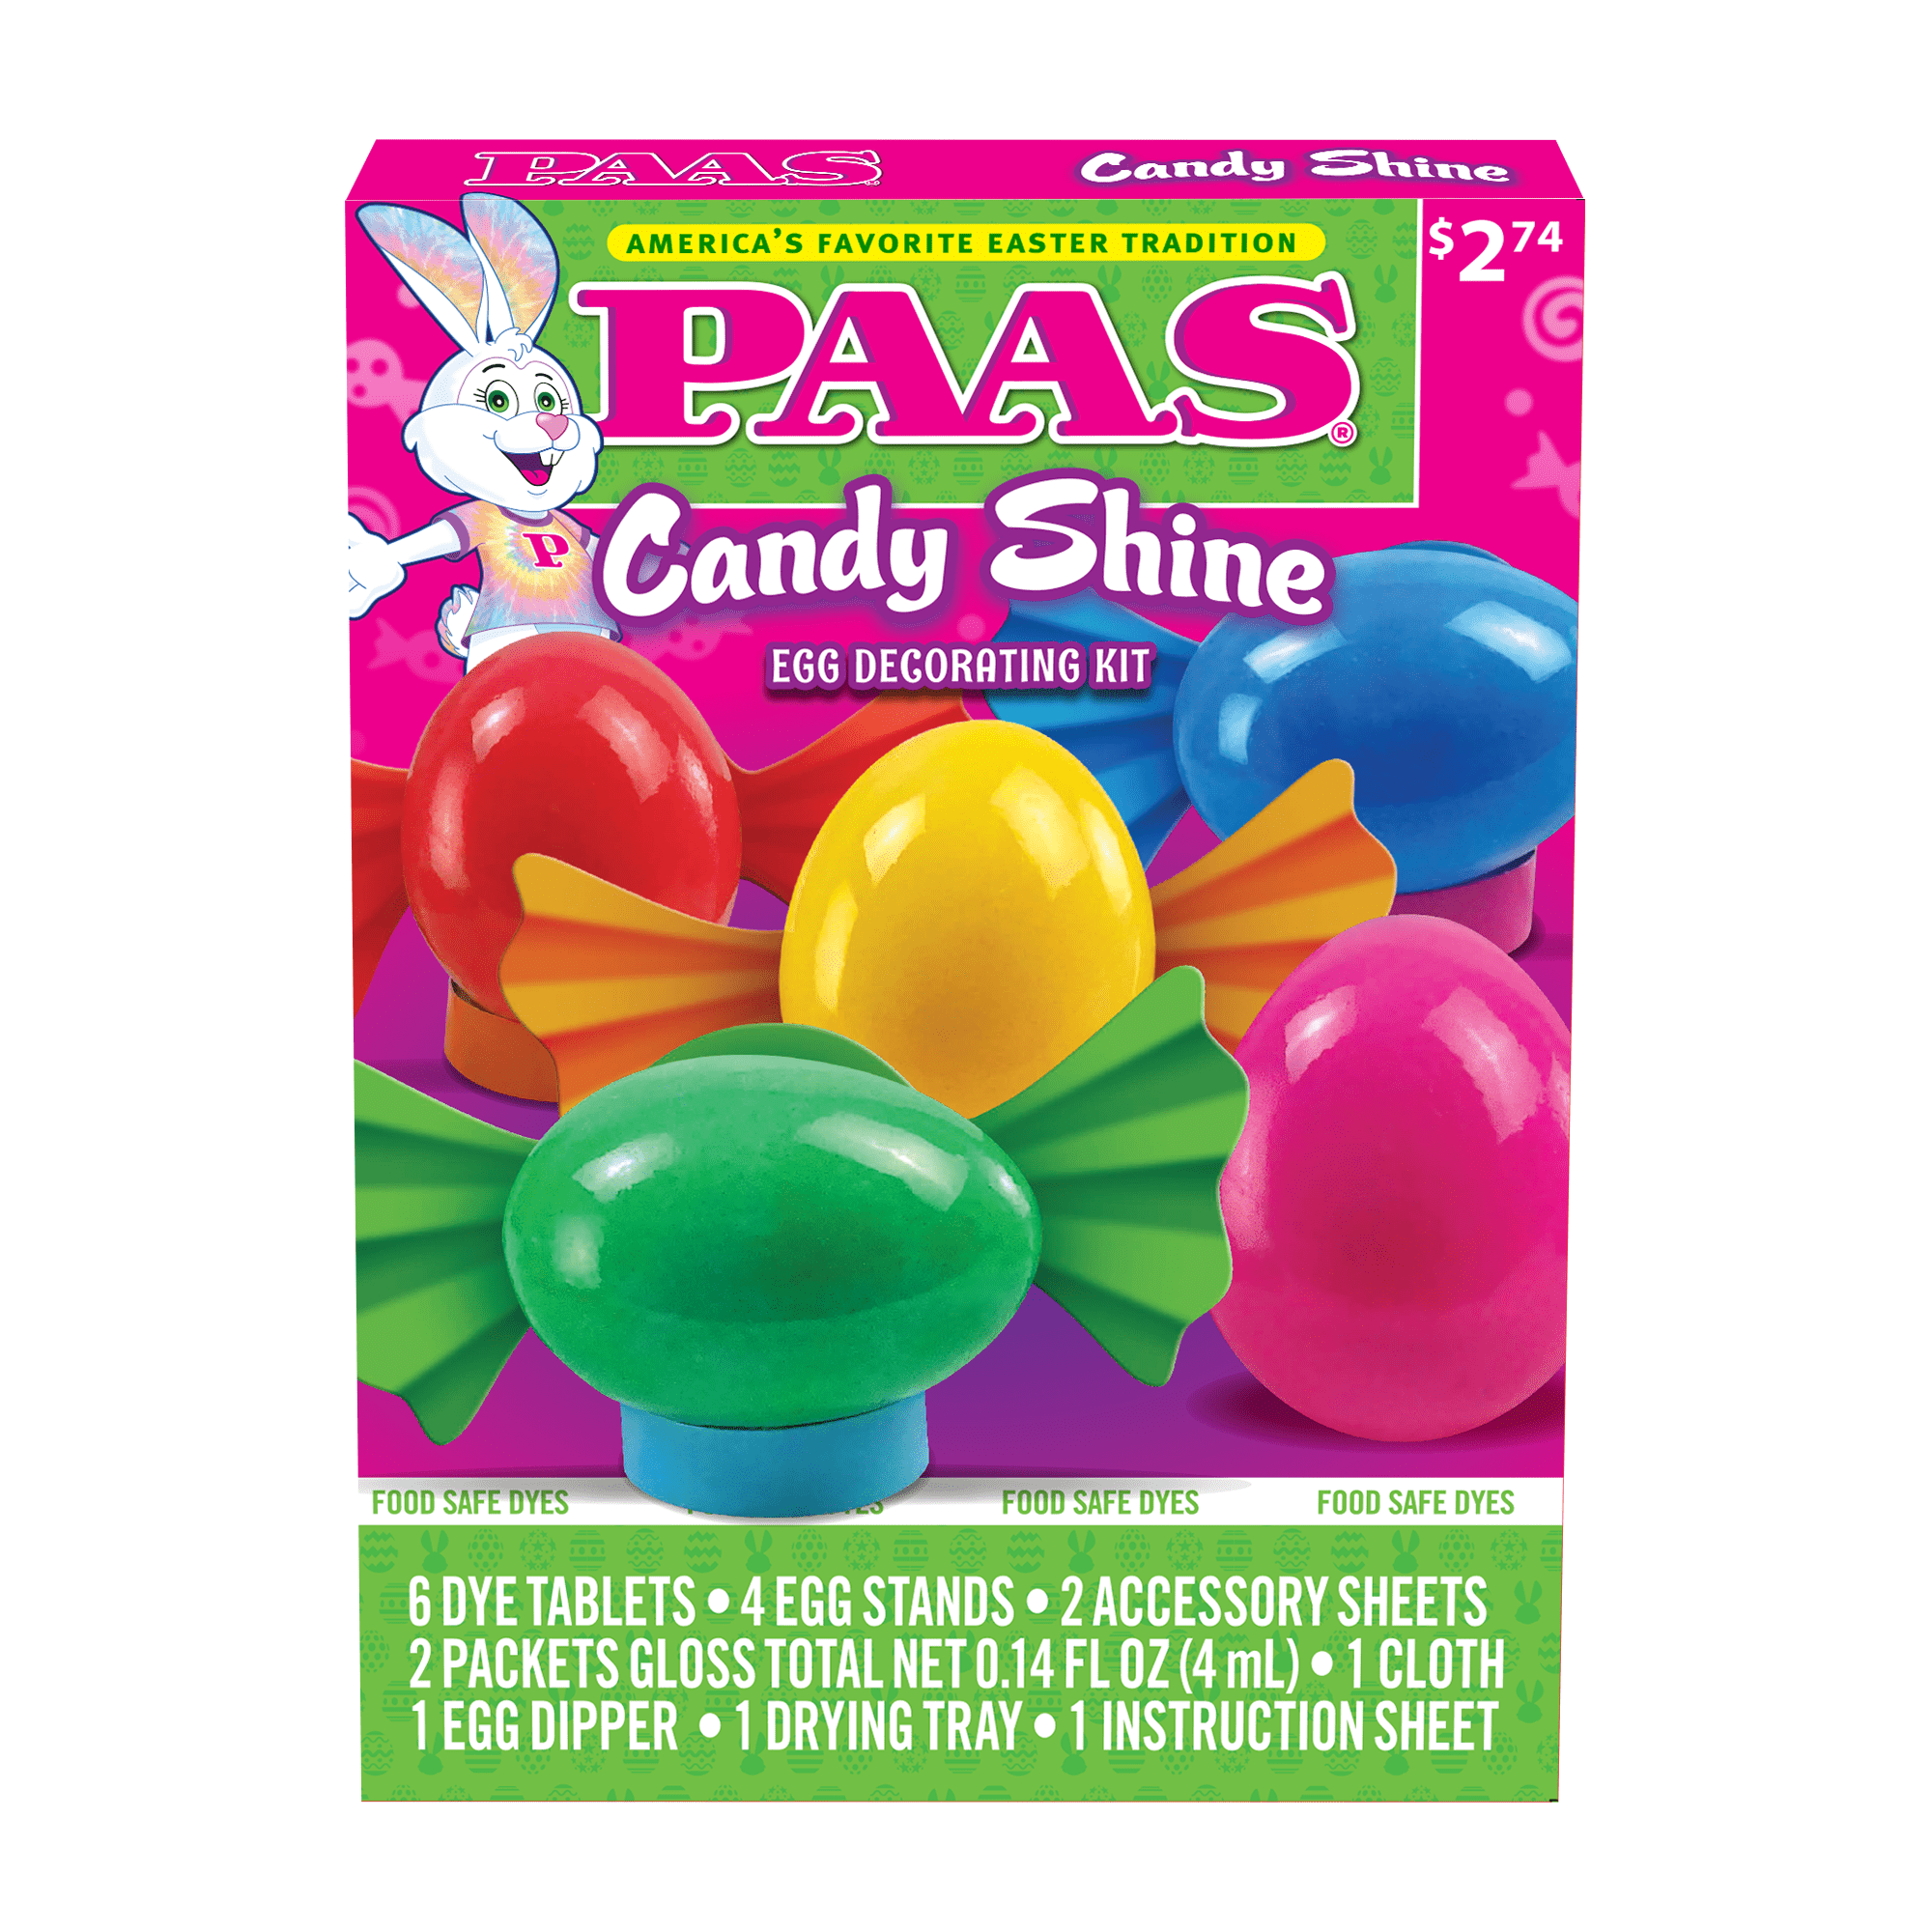 PAAS Easter Egg Decorating and Dye Kit, Candy Shine, 1 Kit ...